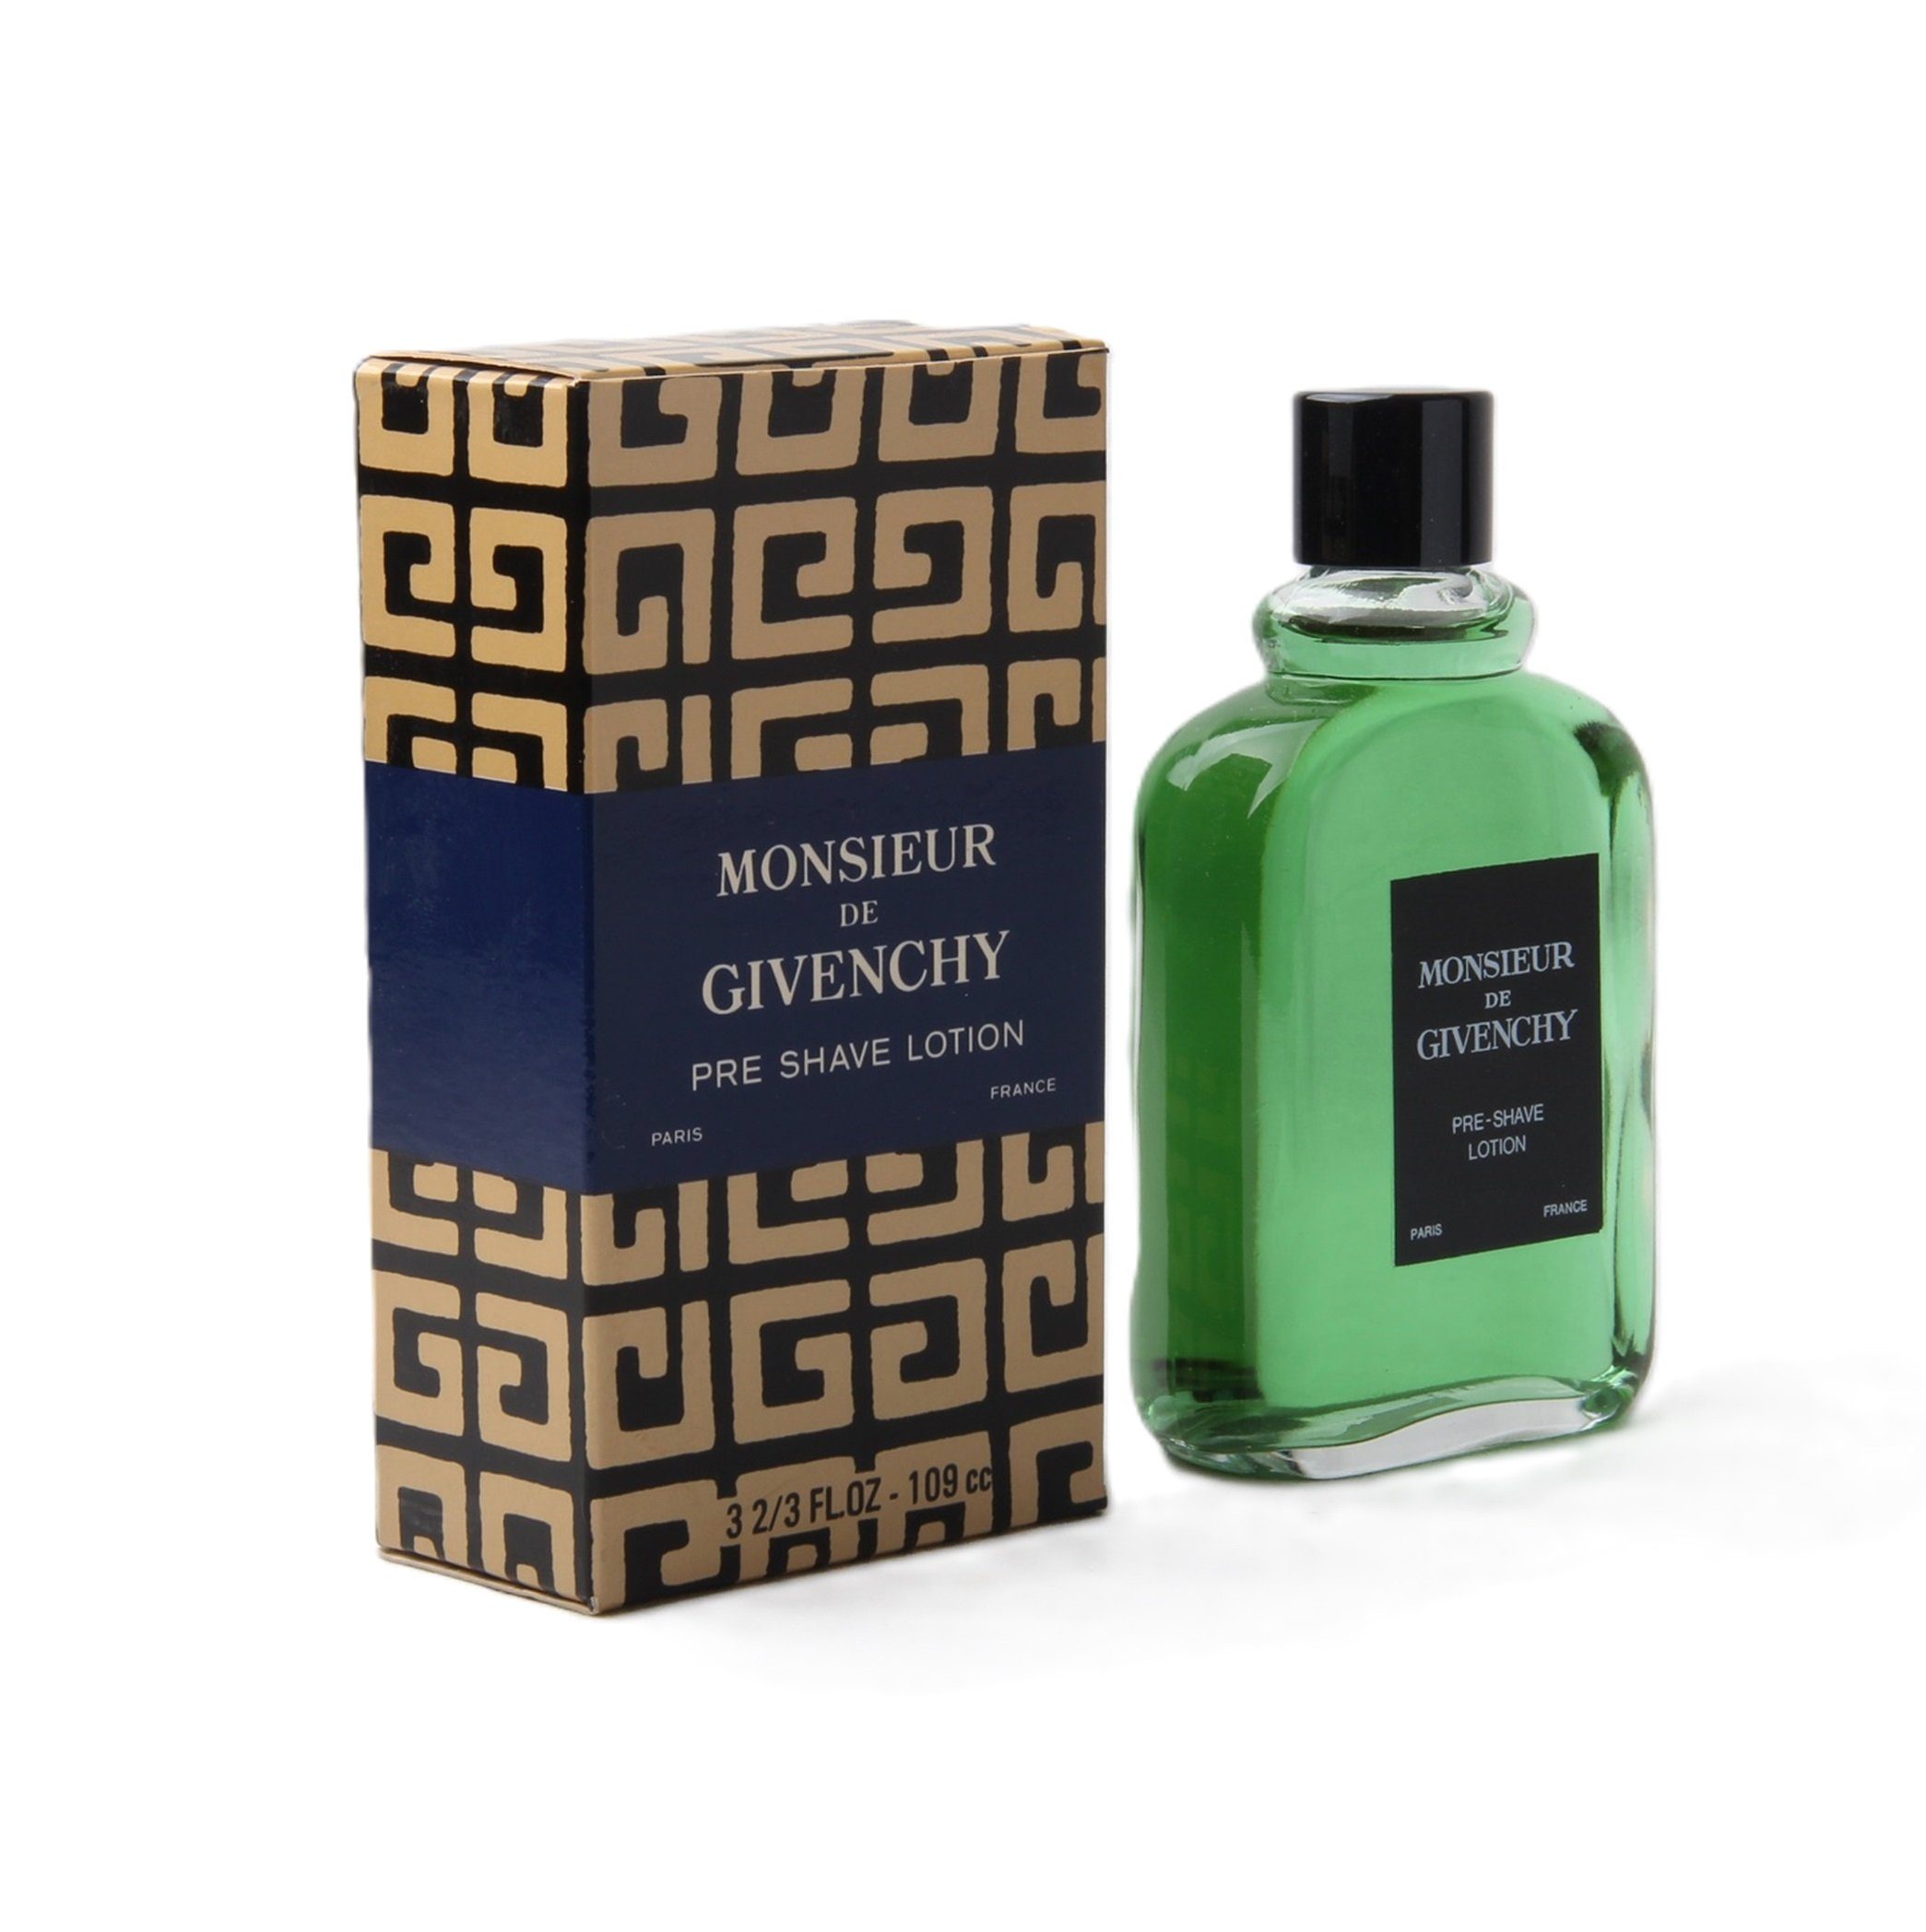 GIVENCHY After-Shave MONSIEUR DE GIVENCHY Pre SHAVE LOTION 109ml